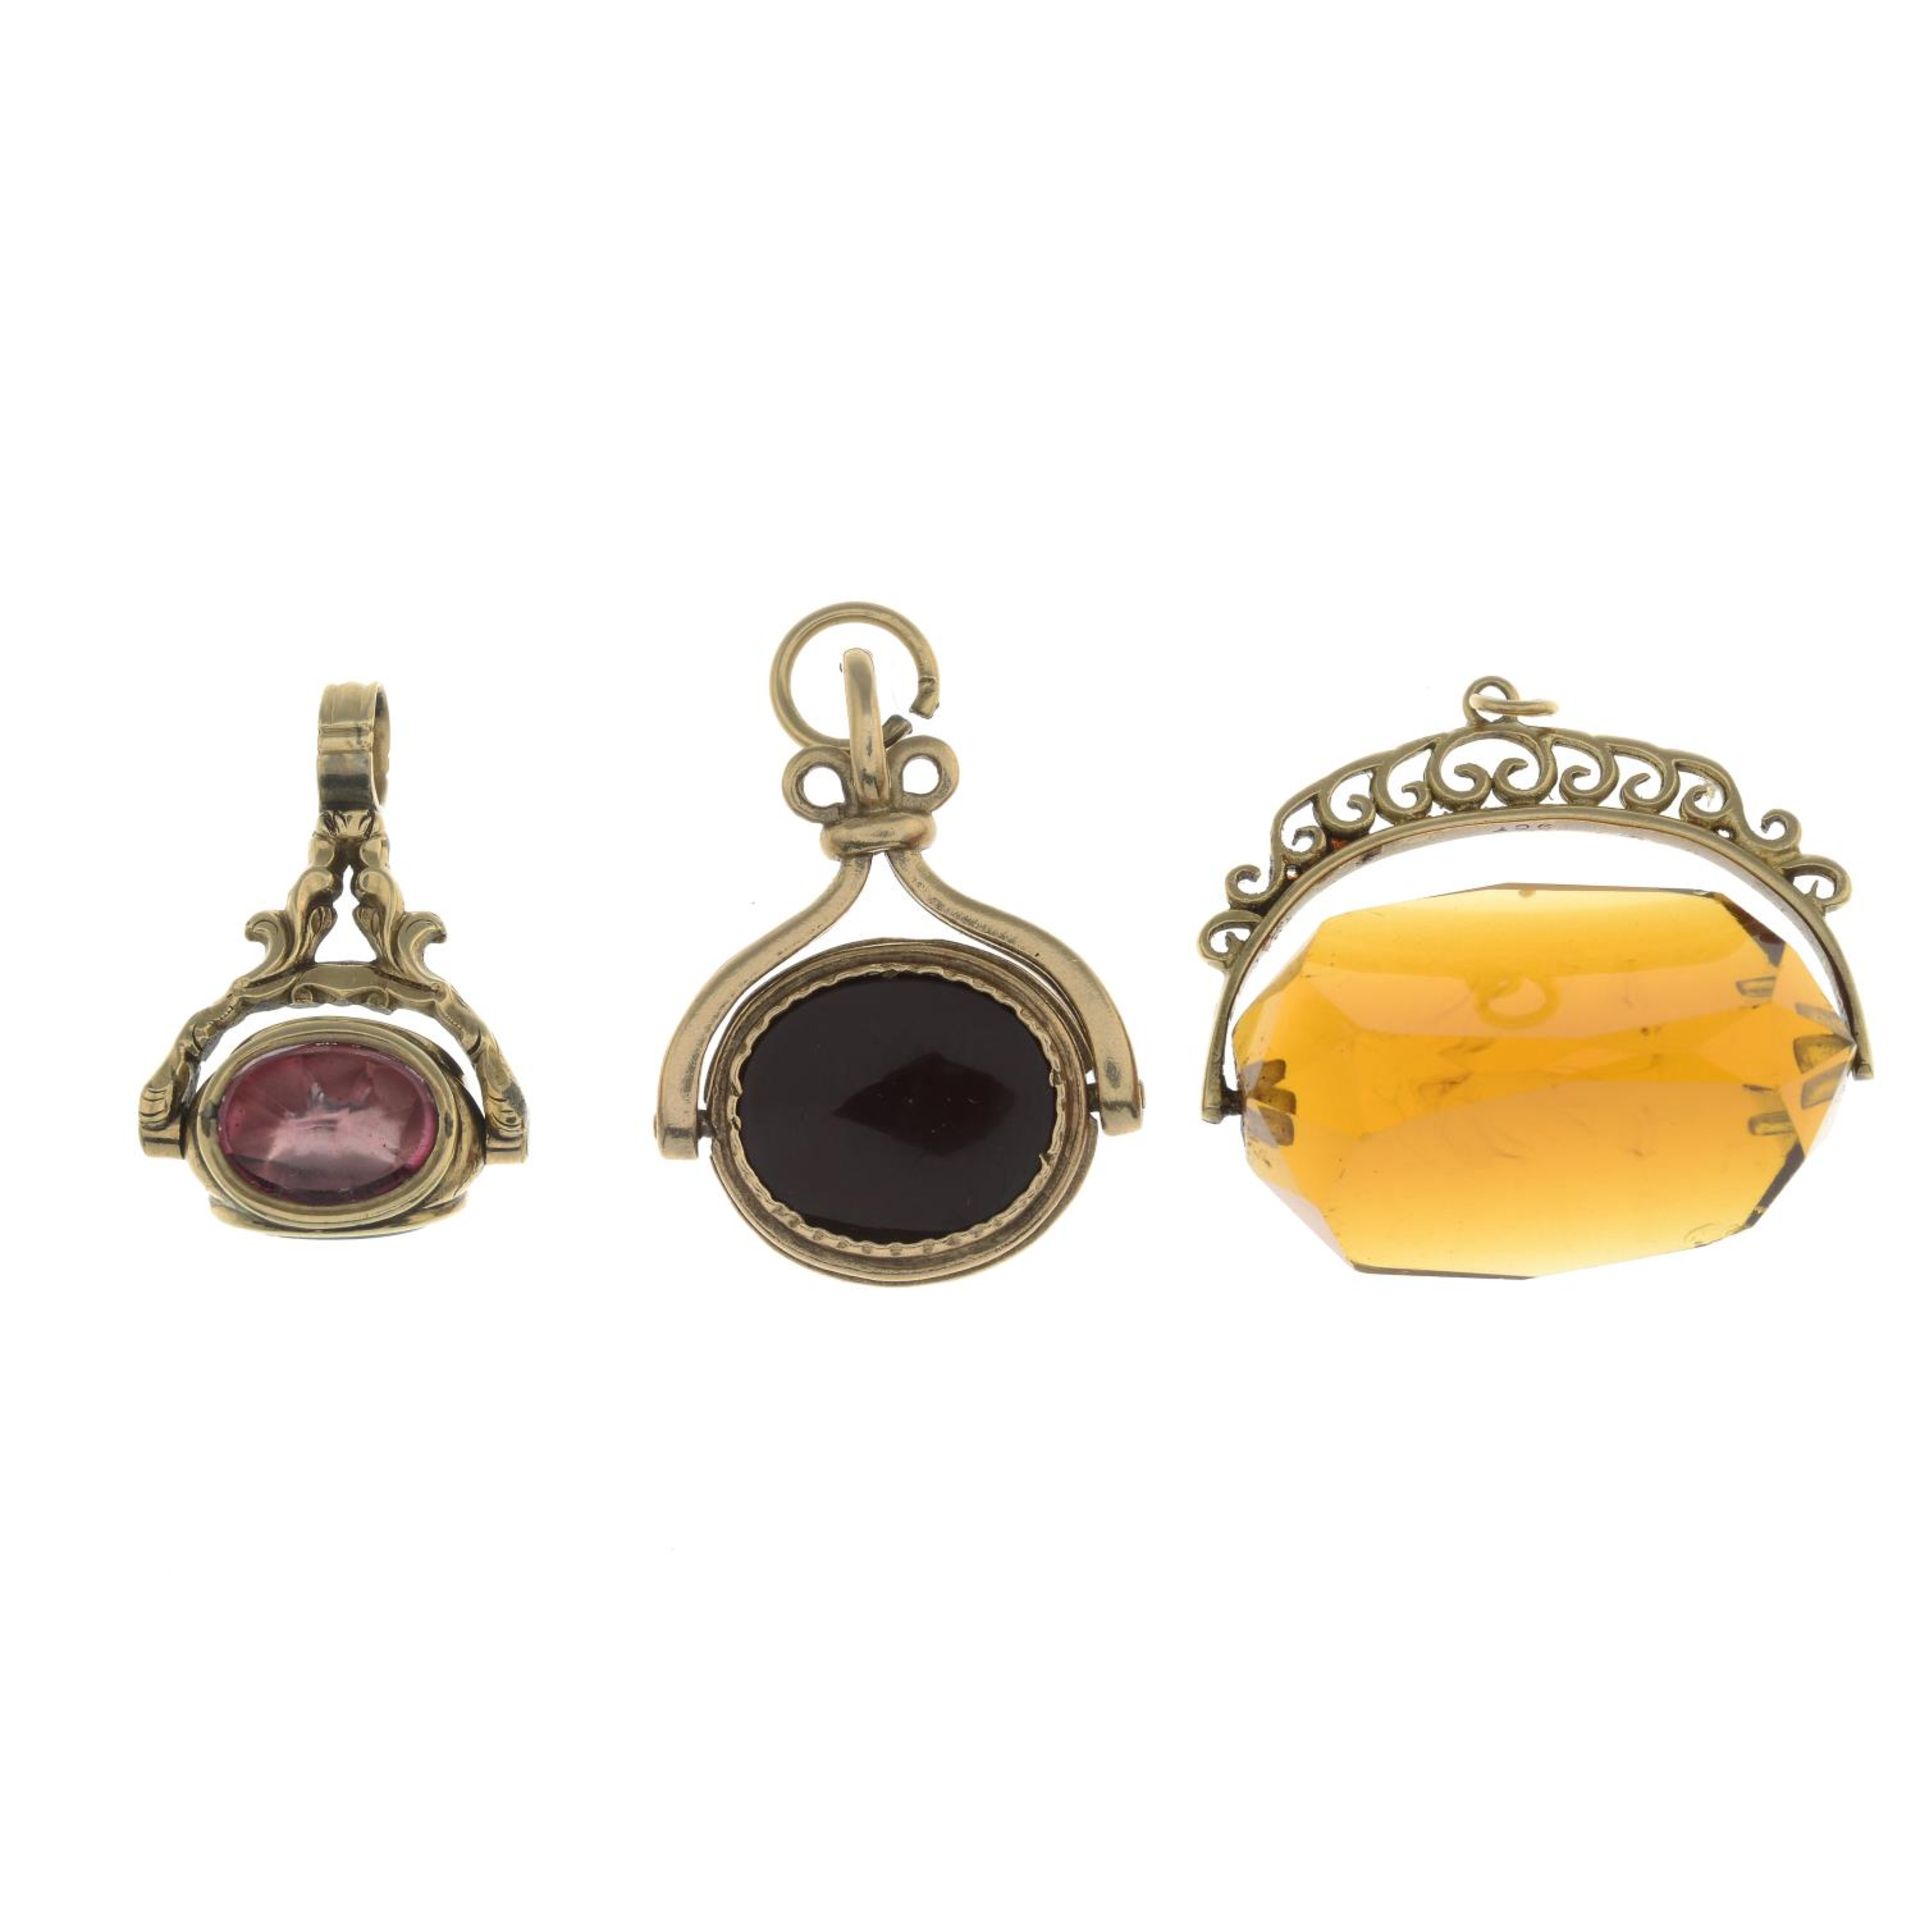 9ct gold carnelian and onyx fob, hallmarks for 9ct gold, length 3.4cms, total weight 5.4gms.